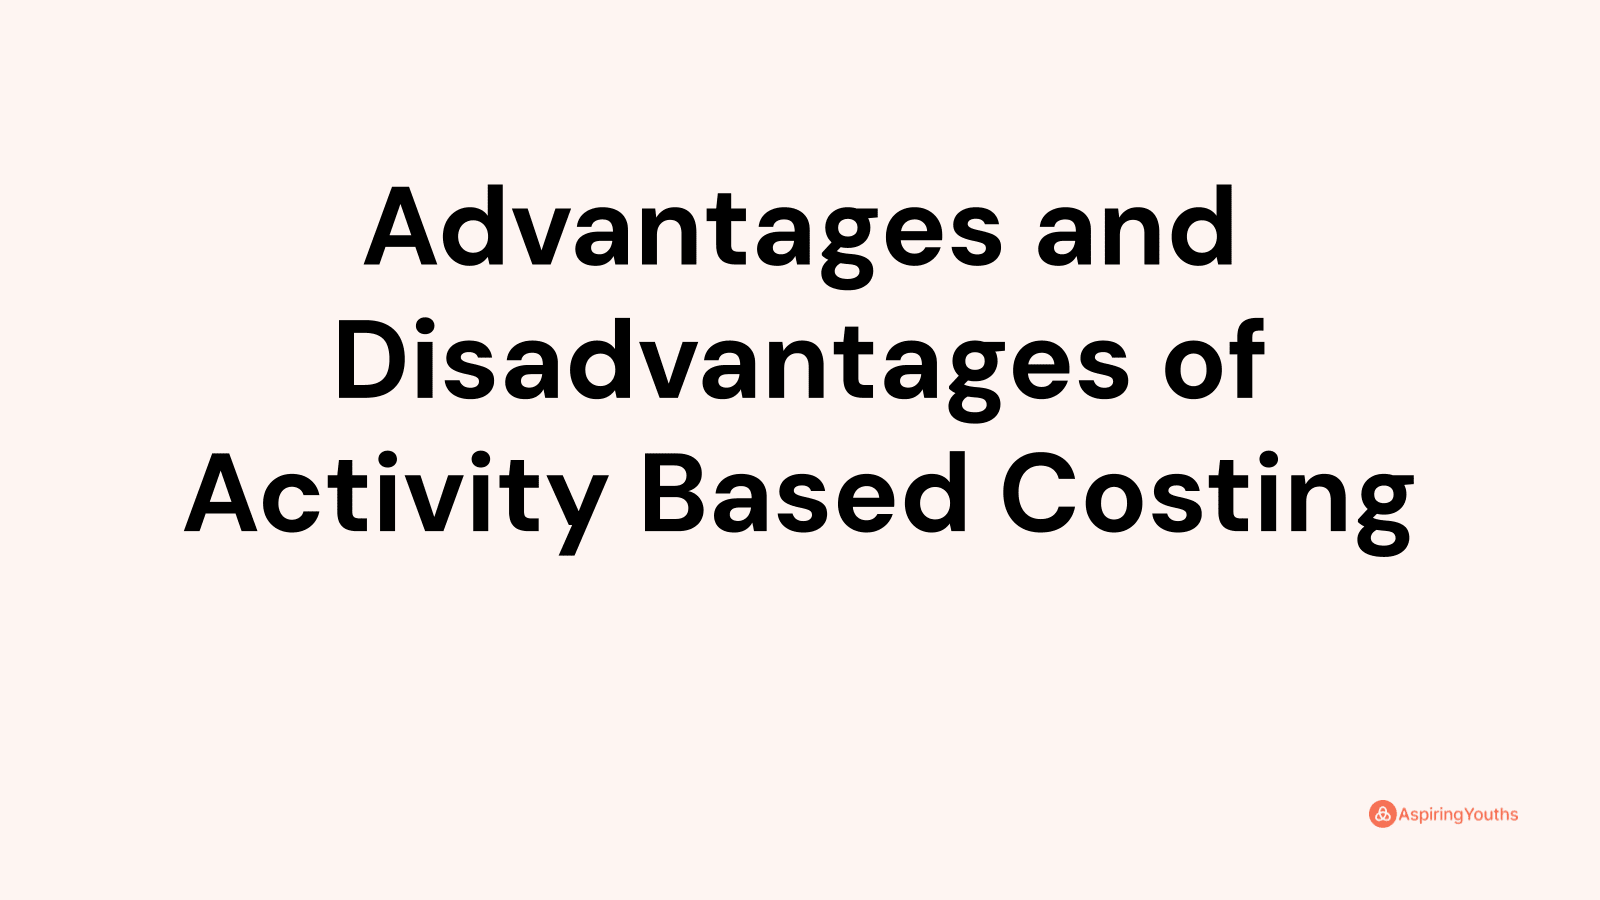 Advantages and disadvantages of Activity Based Costing